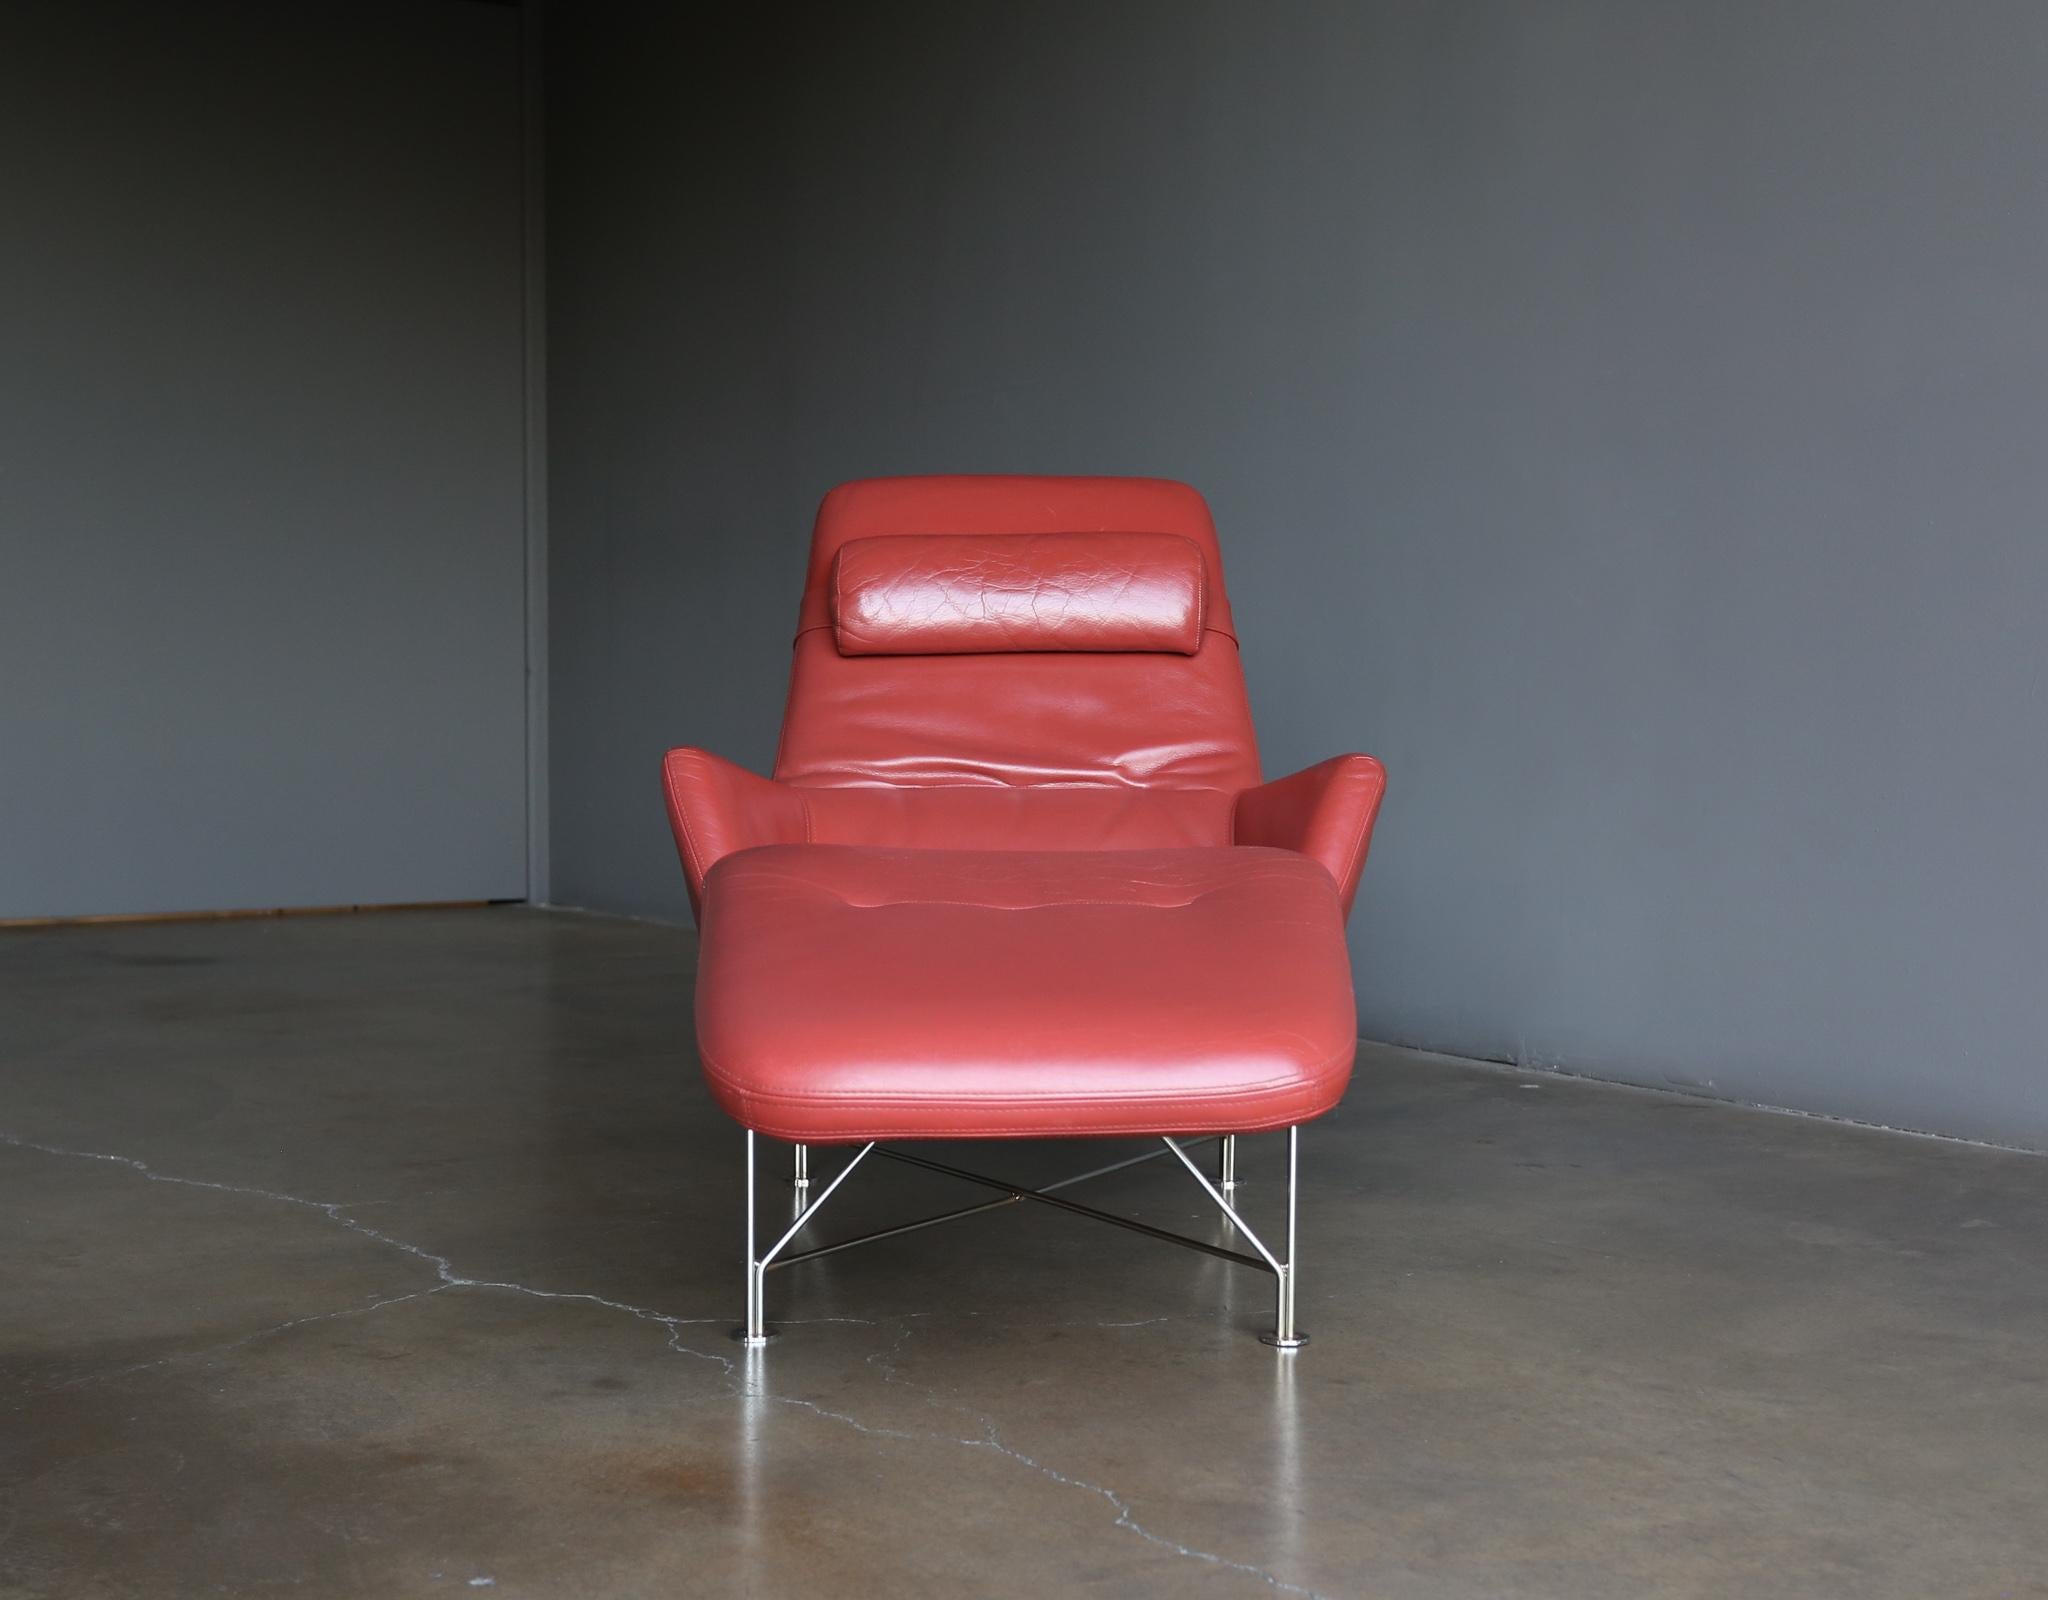 Steel Kenneth Bergenblad Superspider Leather Lounge Chair for DUX, circa 1987